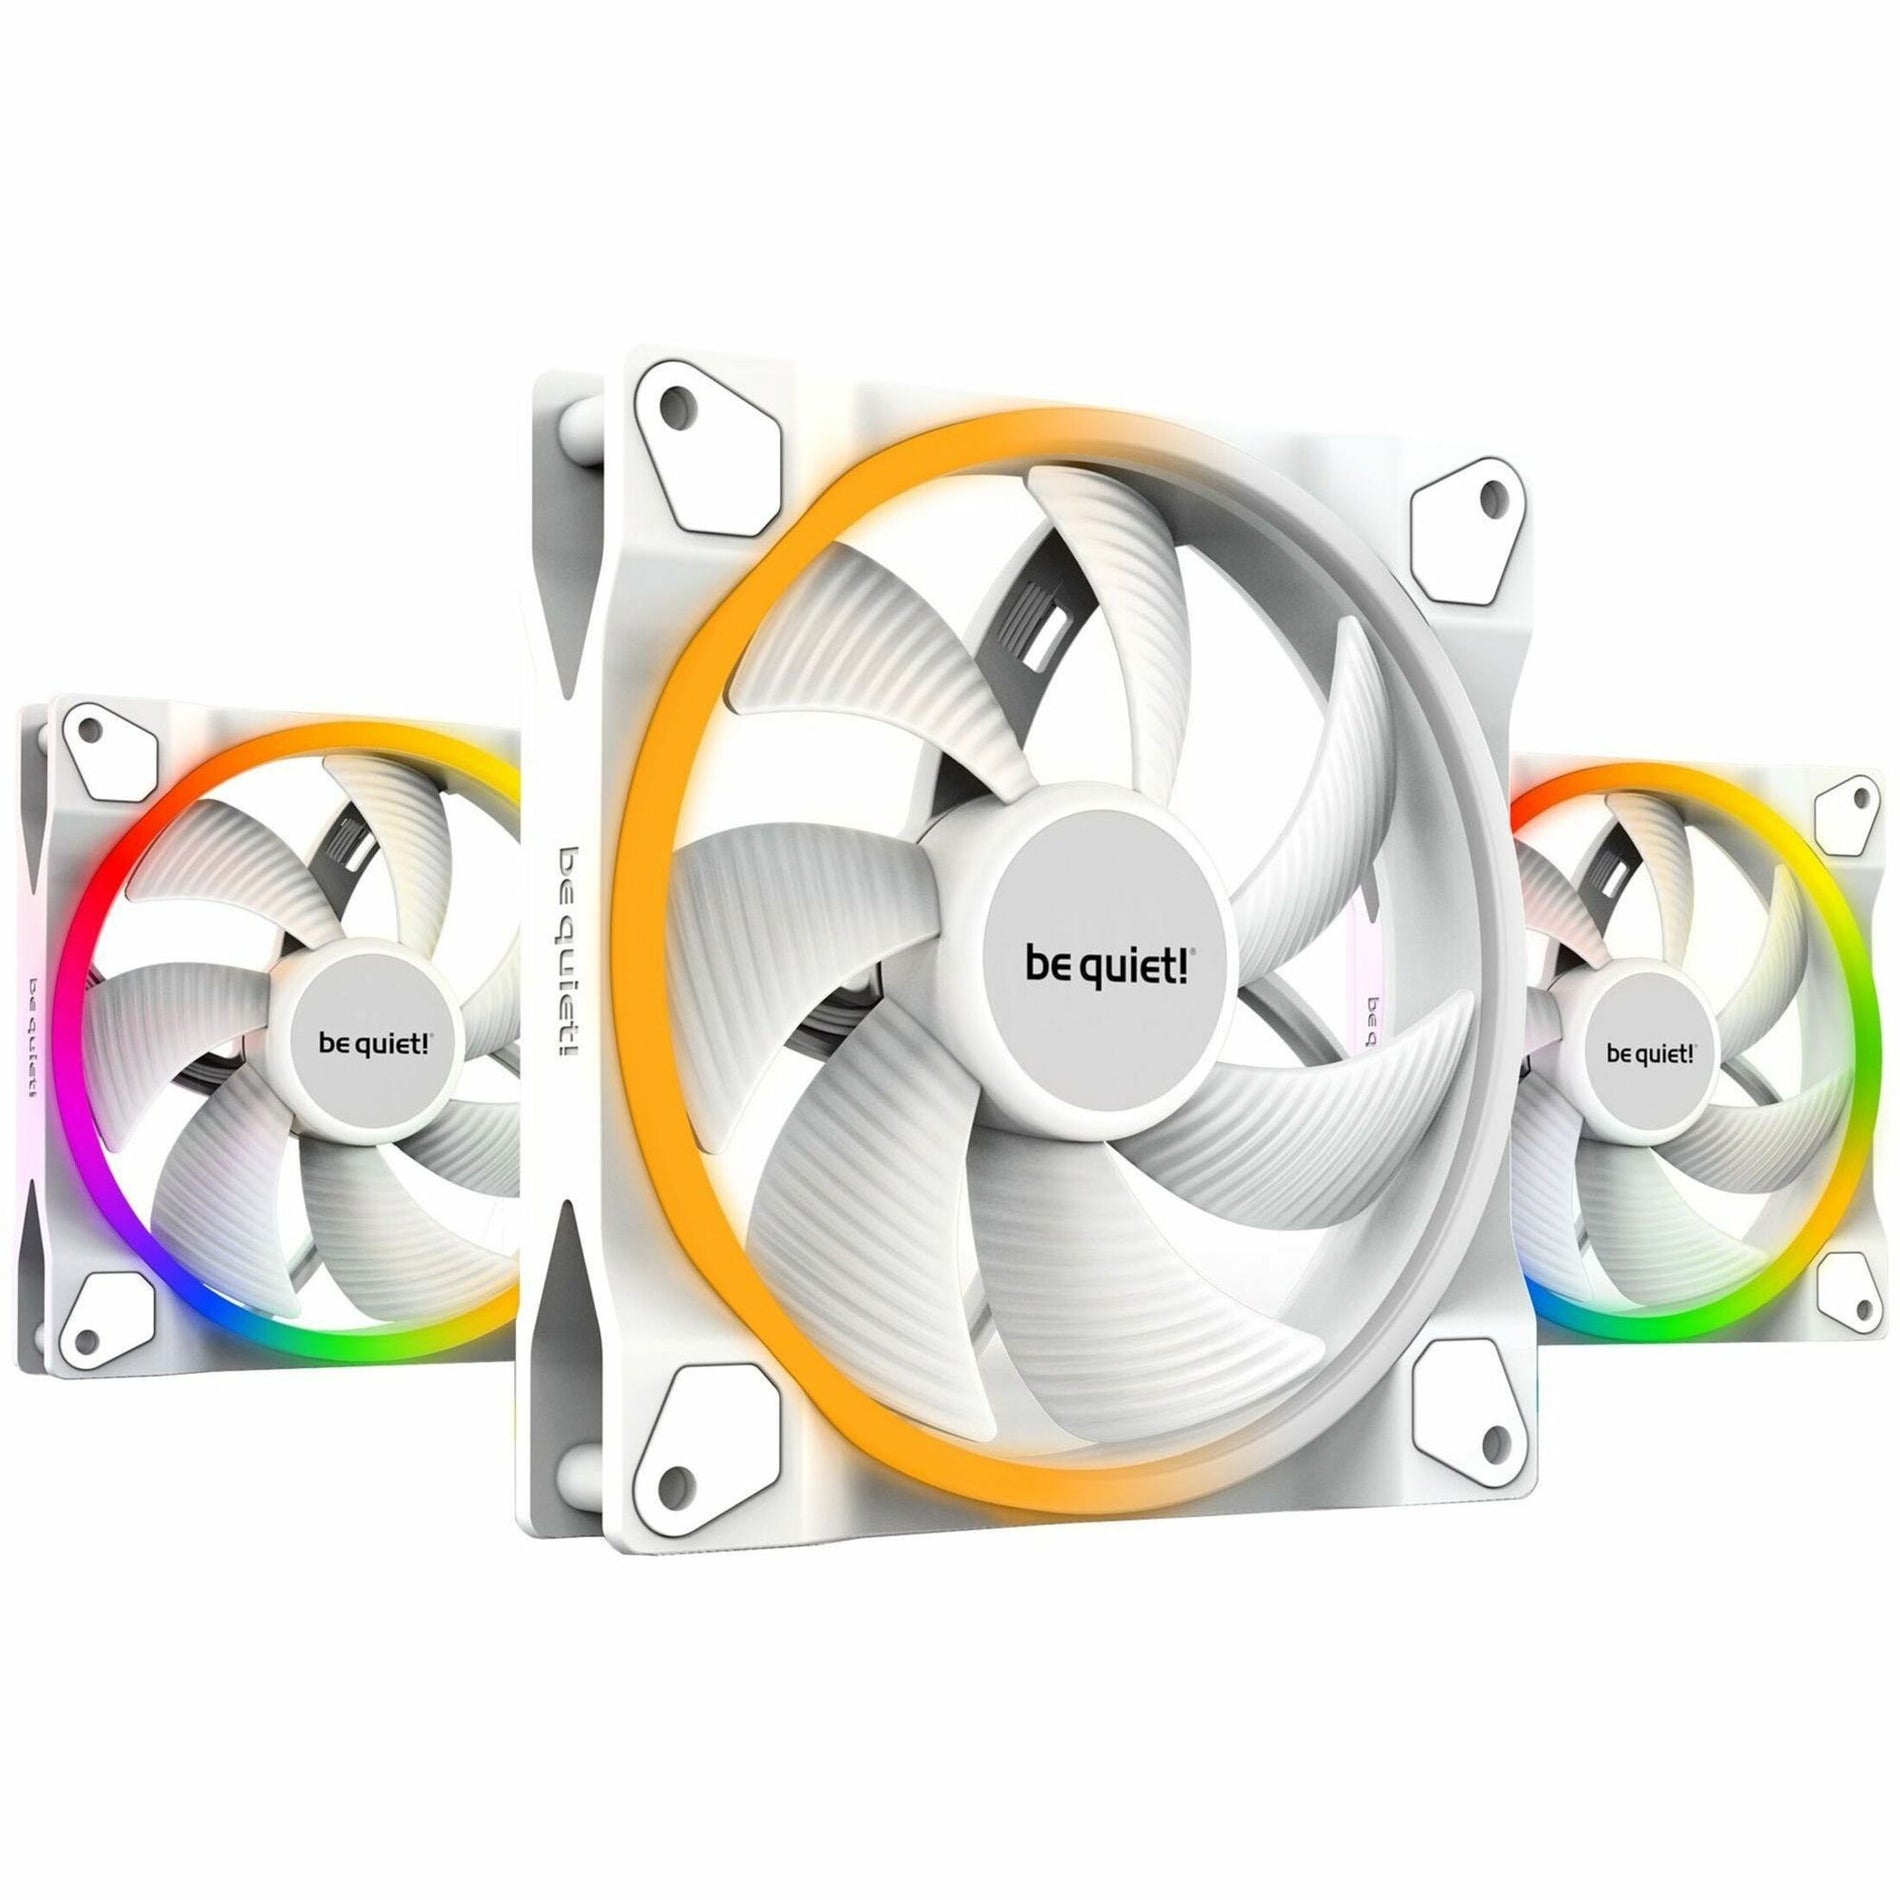 be quiet! BL102 Light Wings Cooling Fan - 3 Pack, Silent Operation, ARGB LED, High Airflow